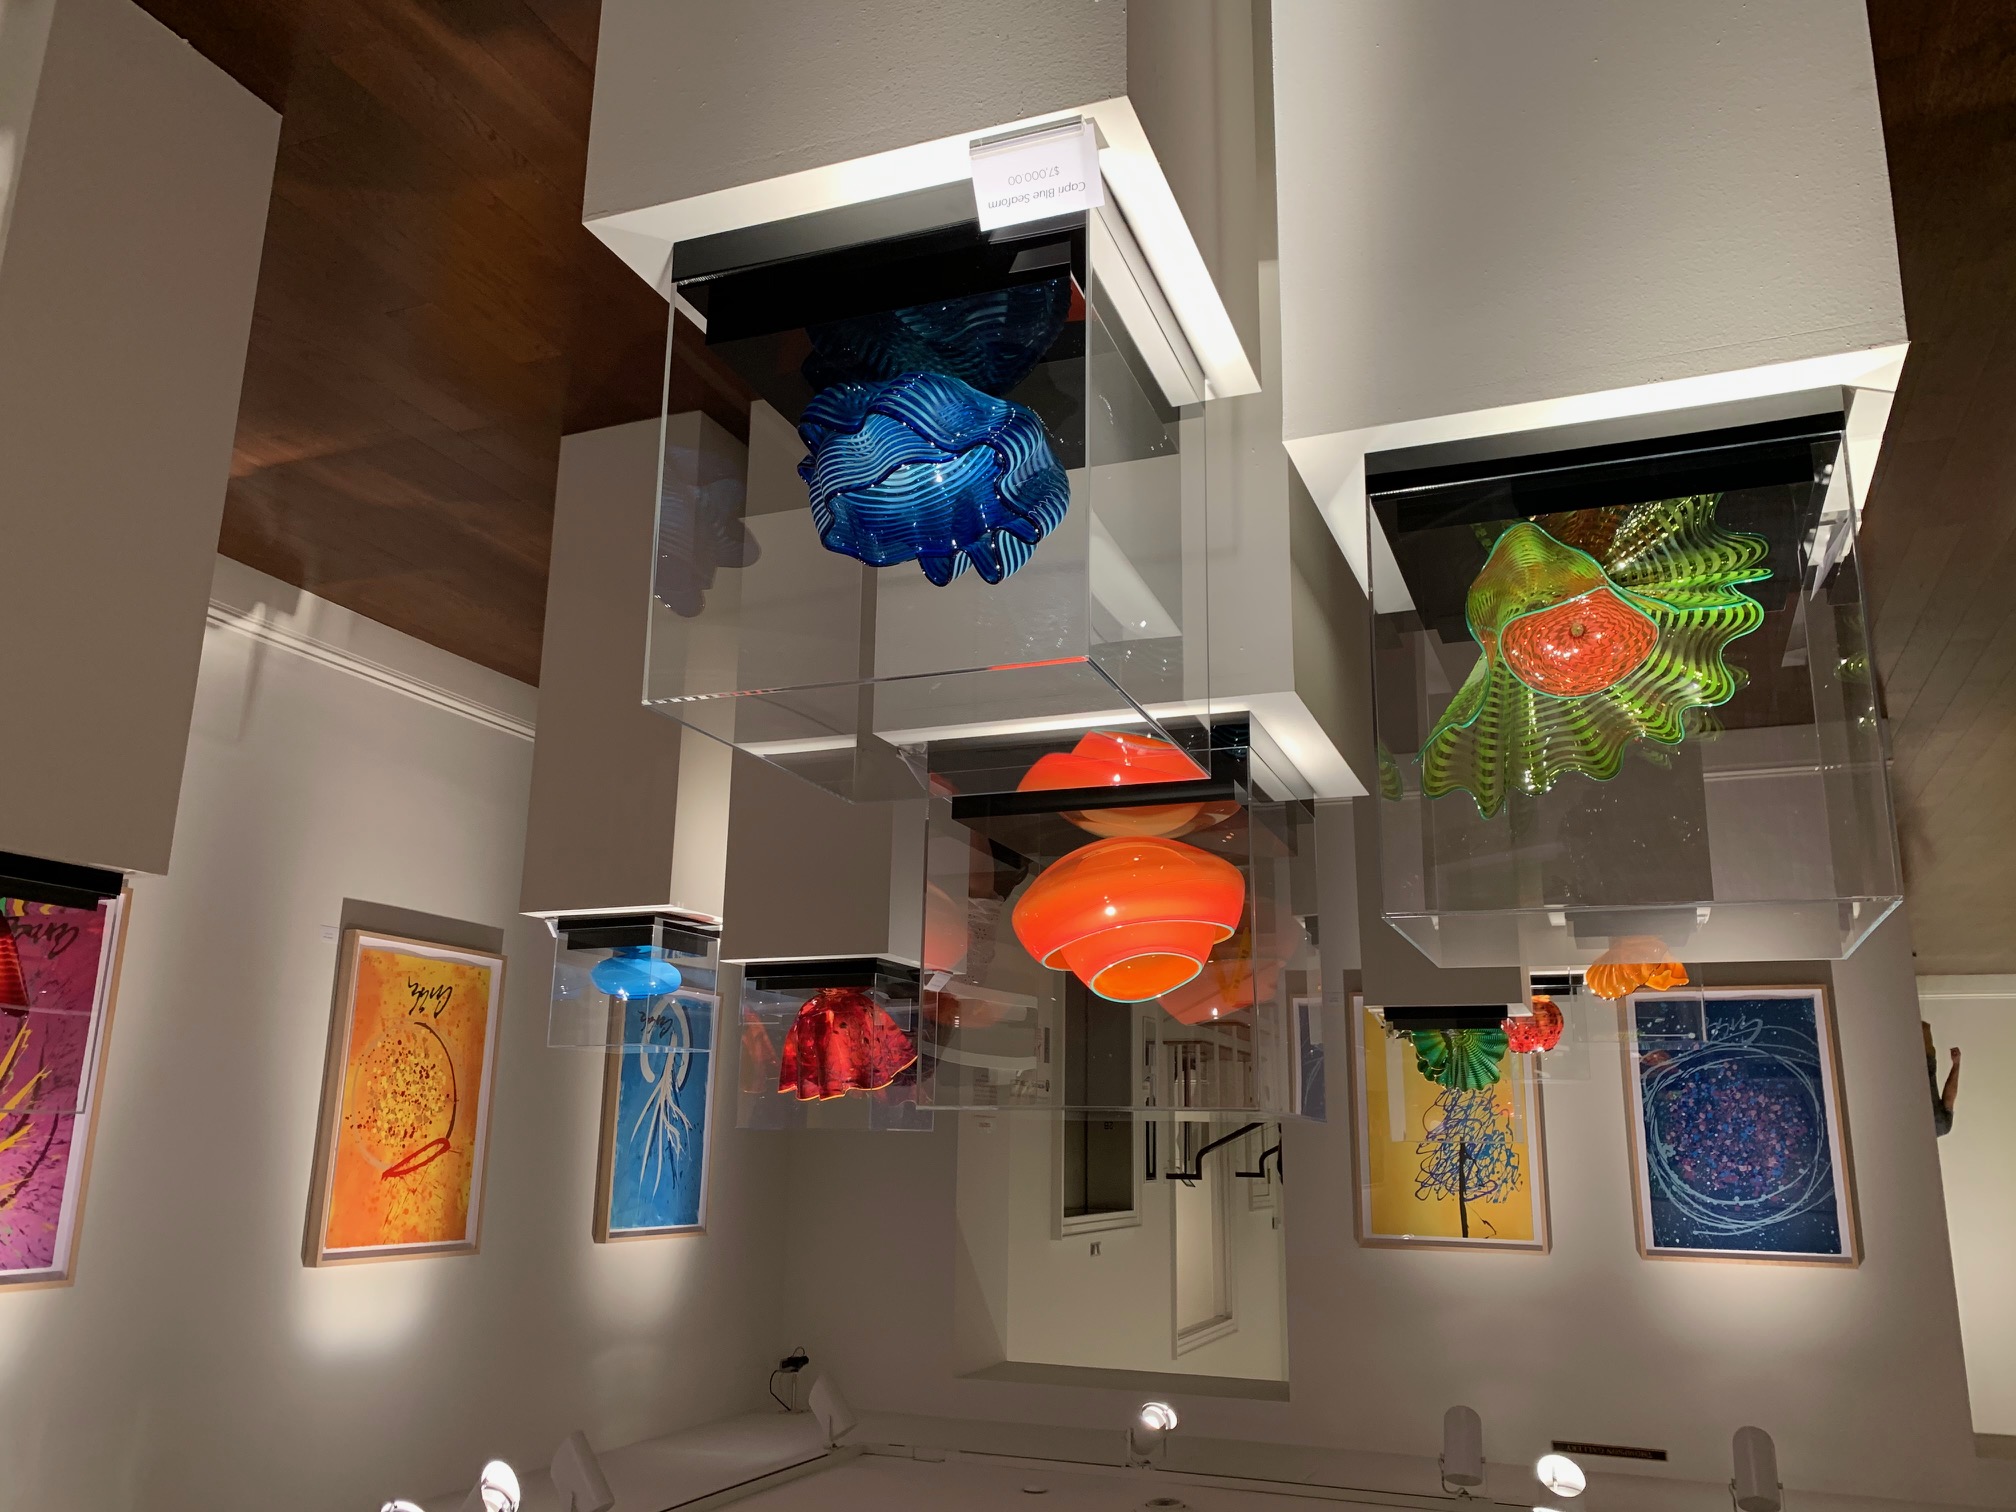 Cheekwood Mansion Gift Shop - Chihuly artwork for sale